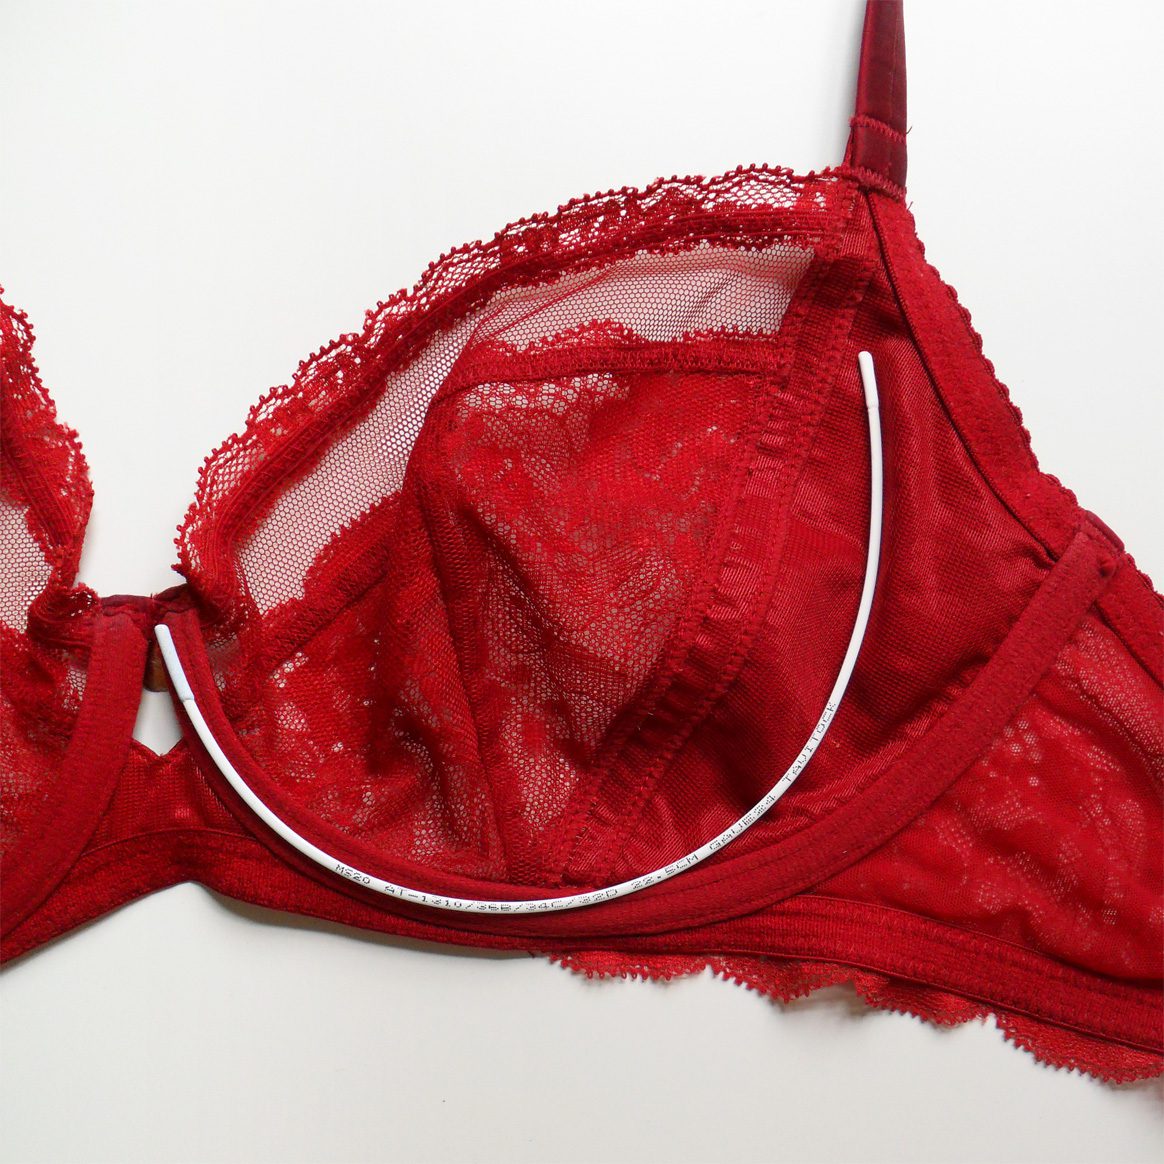 Which bras do you think is better, wire or no wire? - Quora